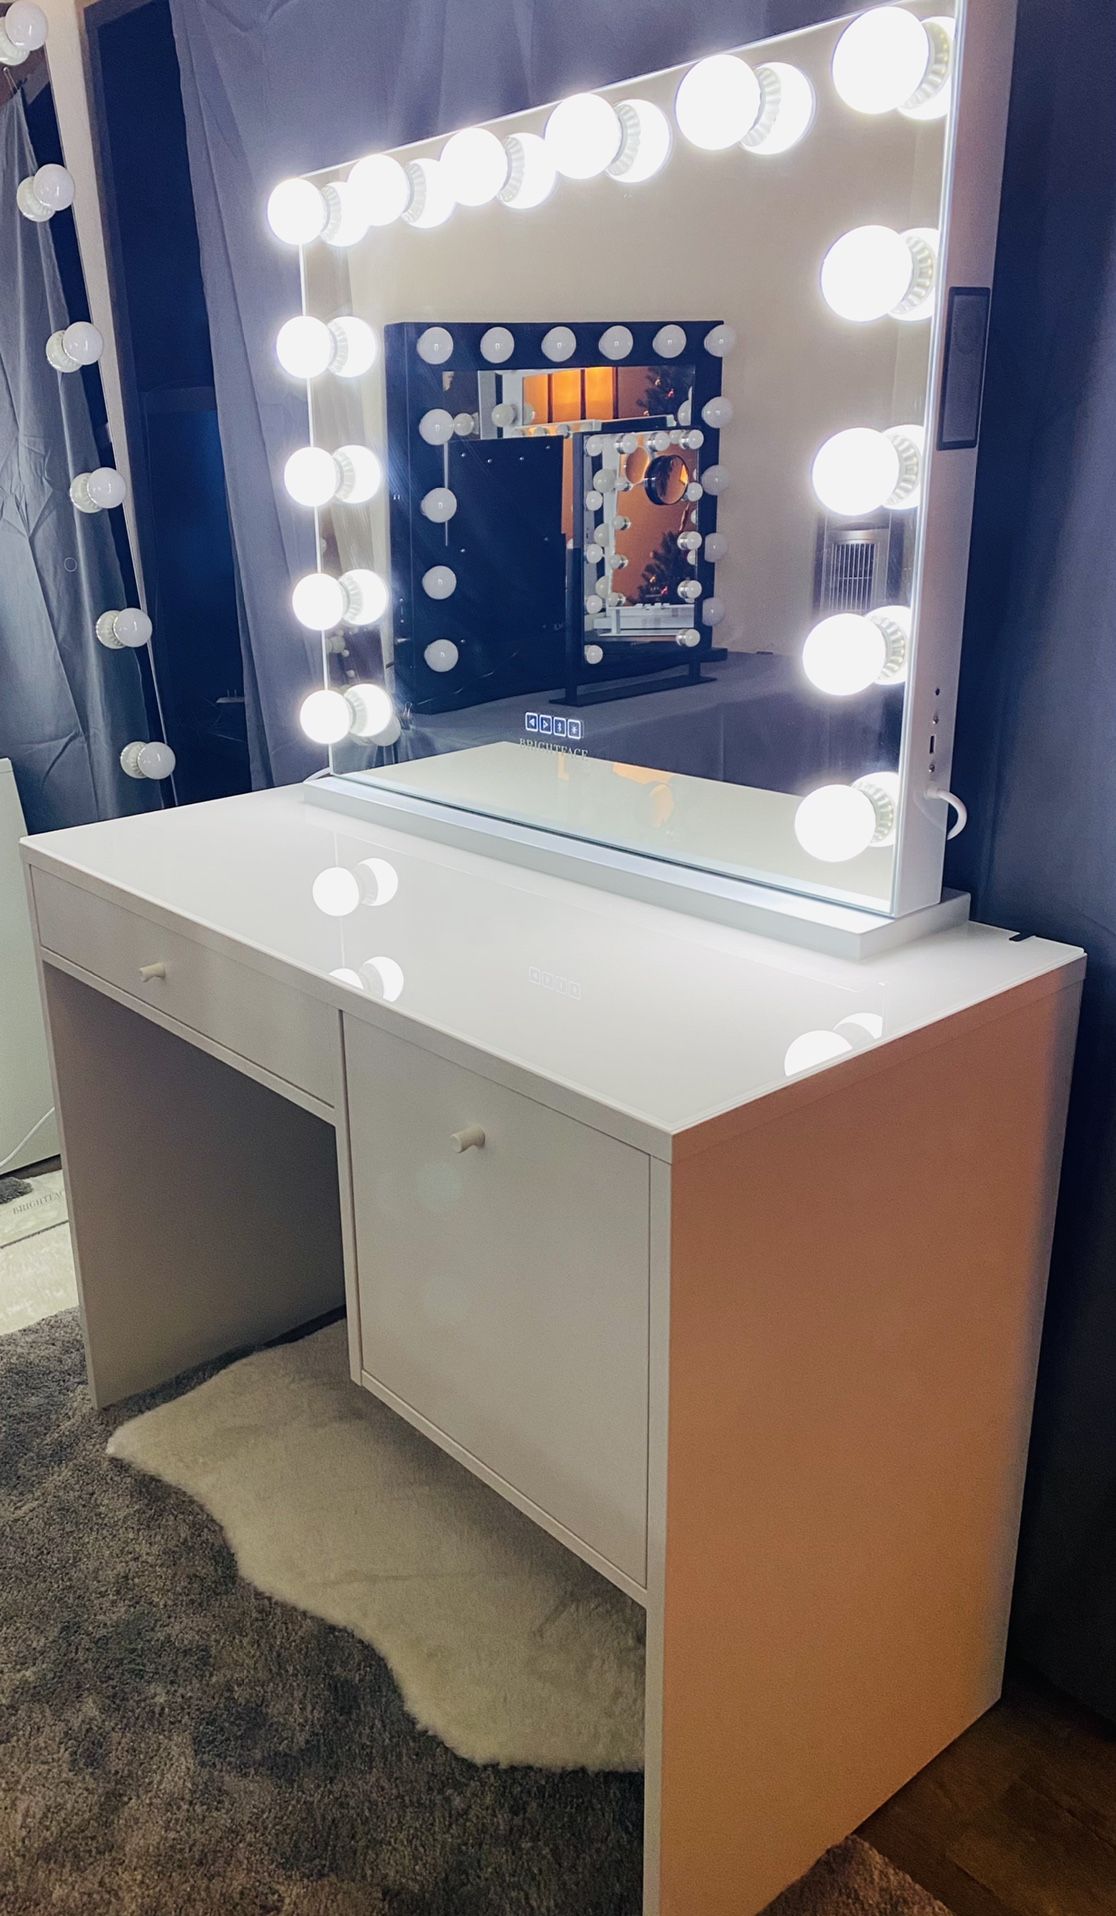 Brand New Vanity Set With Mirror And desk Touchscreen Control With Bluetooth Speaker And replaceable Led Bulbs,usb Port 32” By 27”